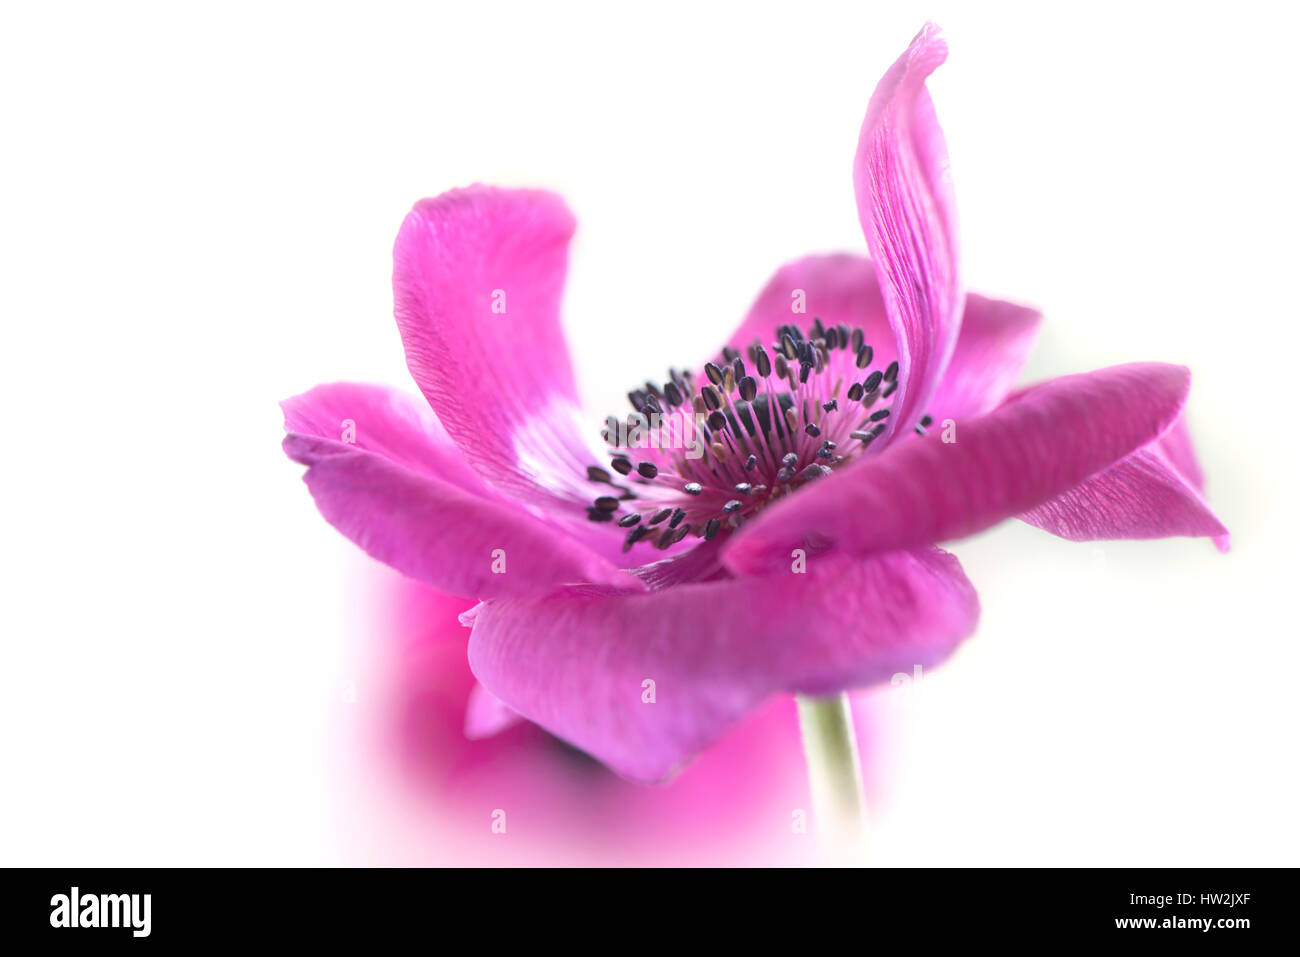 Close-up, High-key image of the beautiful Anemone coronaria De Caen pink flower, also known as the windflower, taken against a white background. Stock Photo